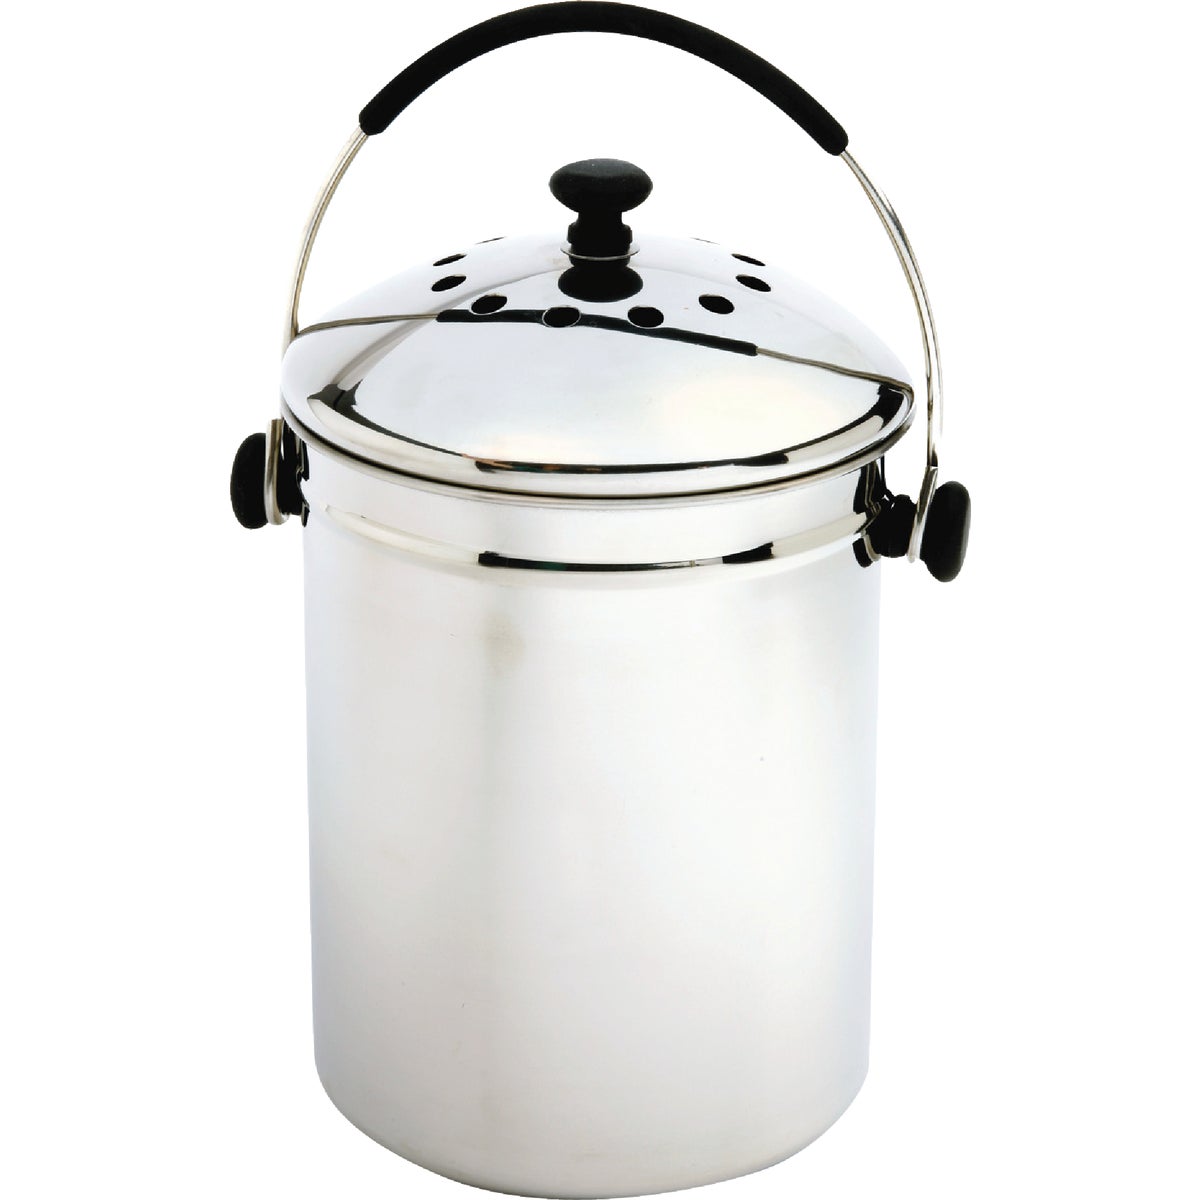 Item 634683, 1 gallon stainless steel compost keeper.